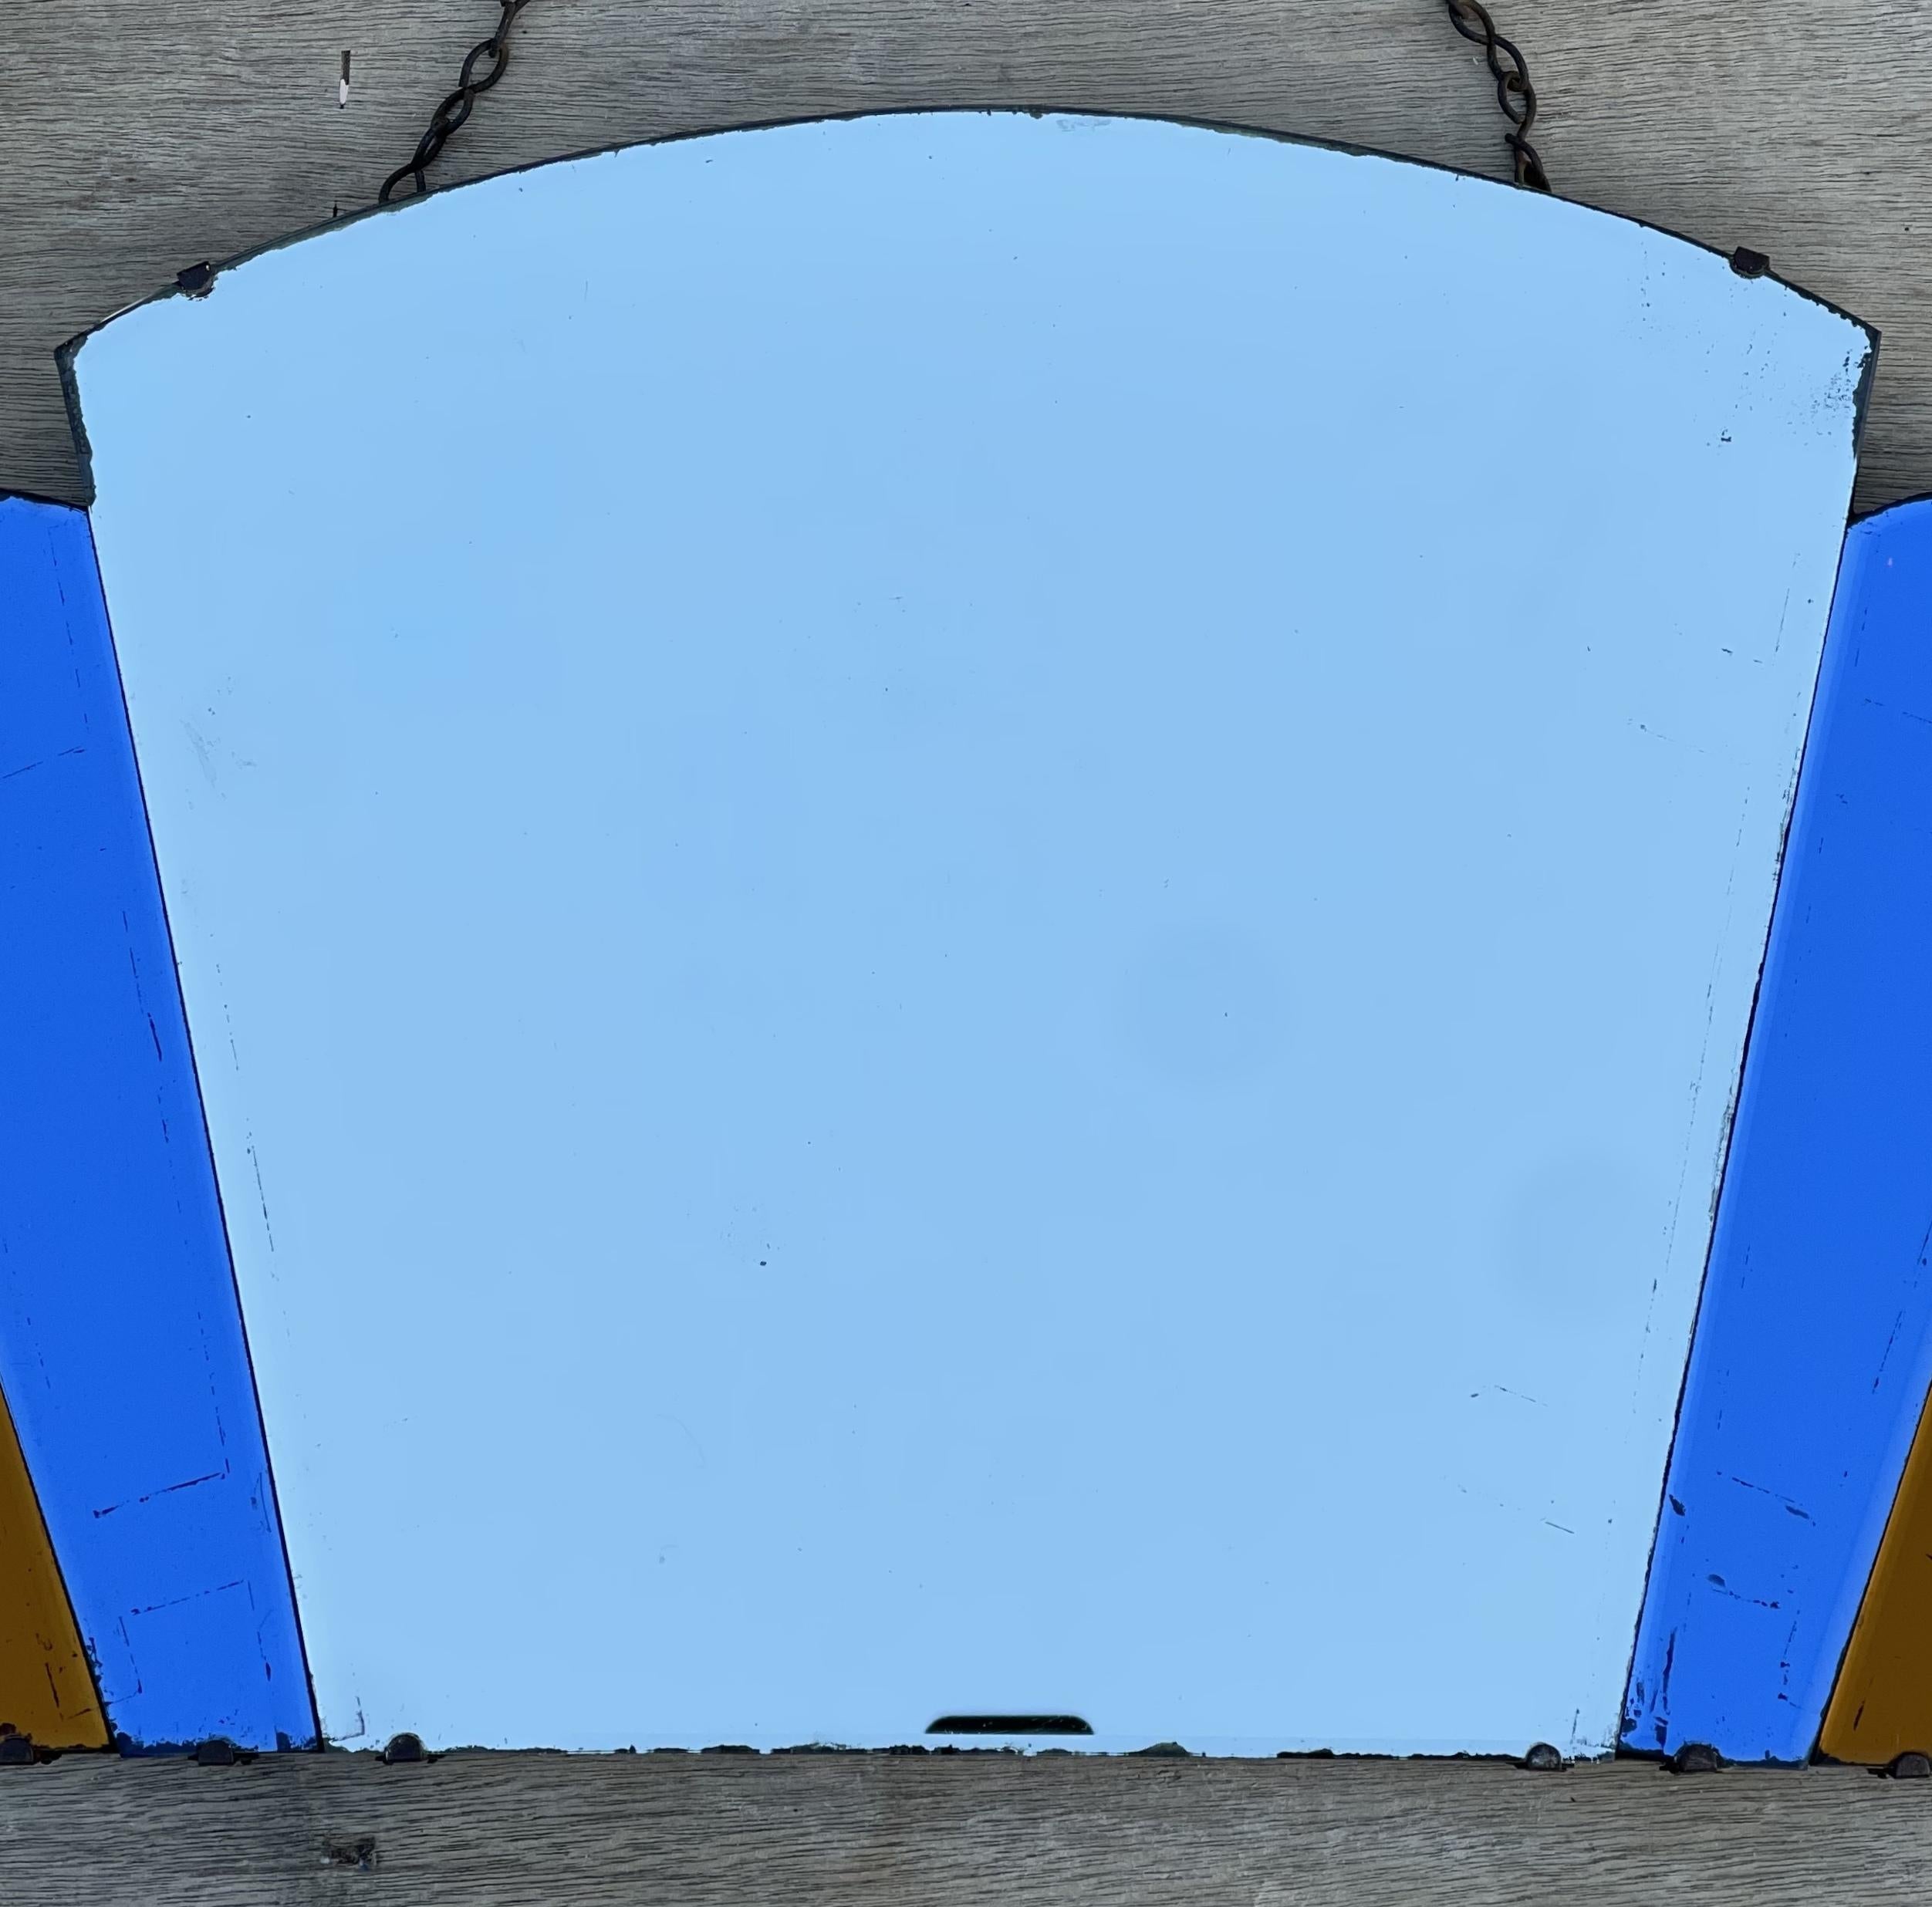 We are delighted to offer for sale absolutely sublime burnt orange & cobalt blue glass Art Deco New York fan mirror 

This mirror is very decorative and well made, the cobalt blue and burnt orange panels laid out in a fan just scream Art Deco